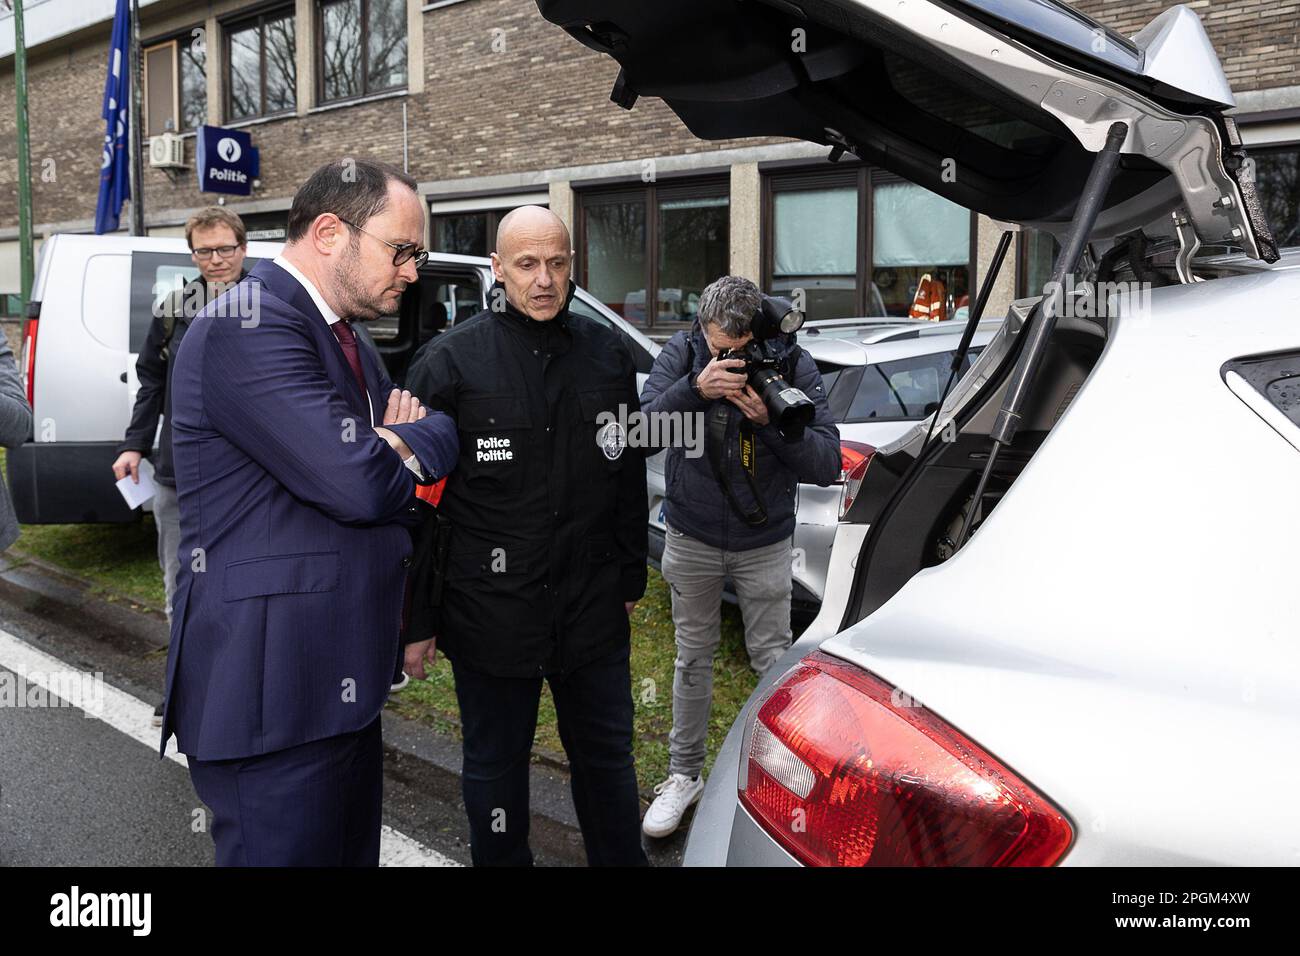 Justice Minister Vincent Van Quickenborne pictured during a press moment of the cabinet of the minister of Justice and the federal police on the criminalization of hidden spaces in vehicles, in Gentbrugge, Ghent, Thursday 23 March 2023. In 2022, the Drugs section of the Central Directorate of the fight against serious and organized crime in Belgium discovered 95 hidden spaces in vehicles. This resulted in the seizure of, among other things, 1.7 million euros in cash, 1.8 tons of cocaine, weapons, mobile phones and other drugs, a record. In about 2 out of 3 observations, the hidden spaces turne Stock Photo